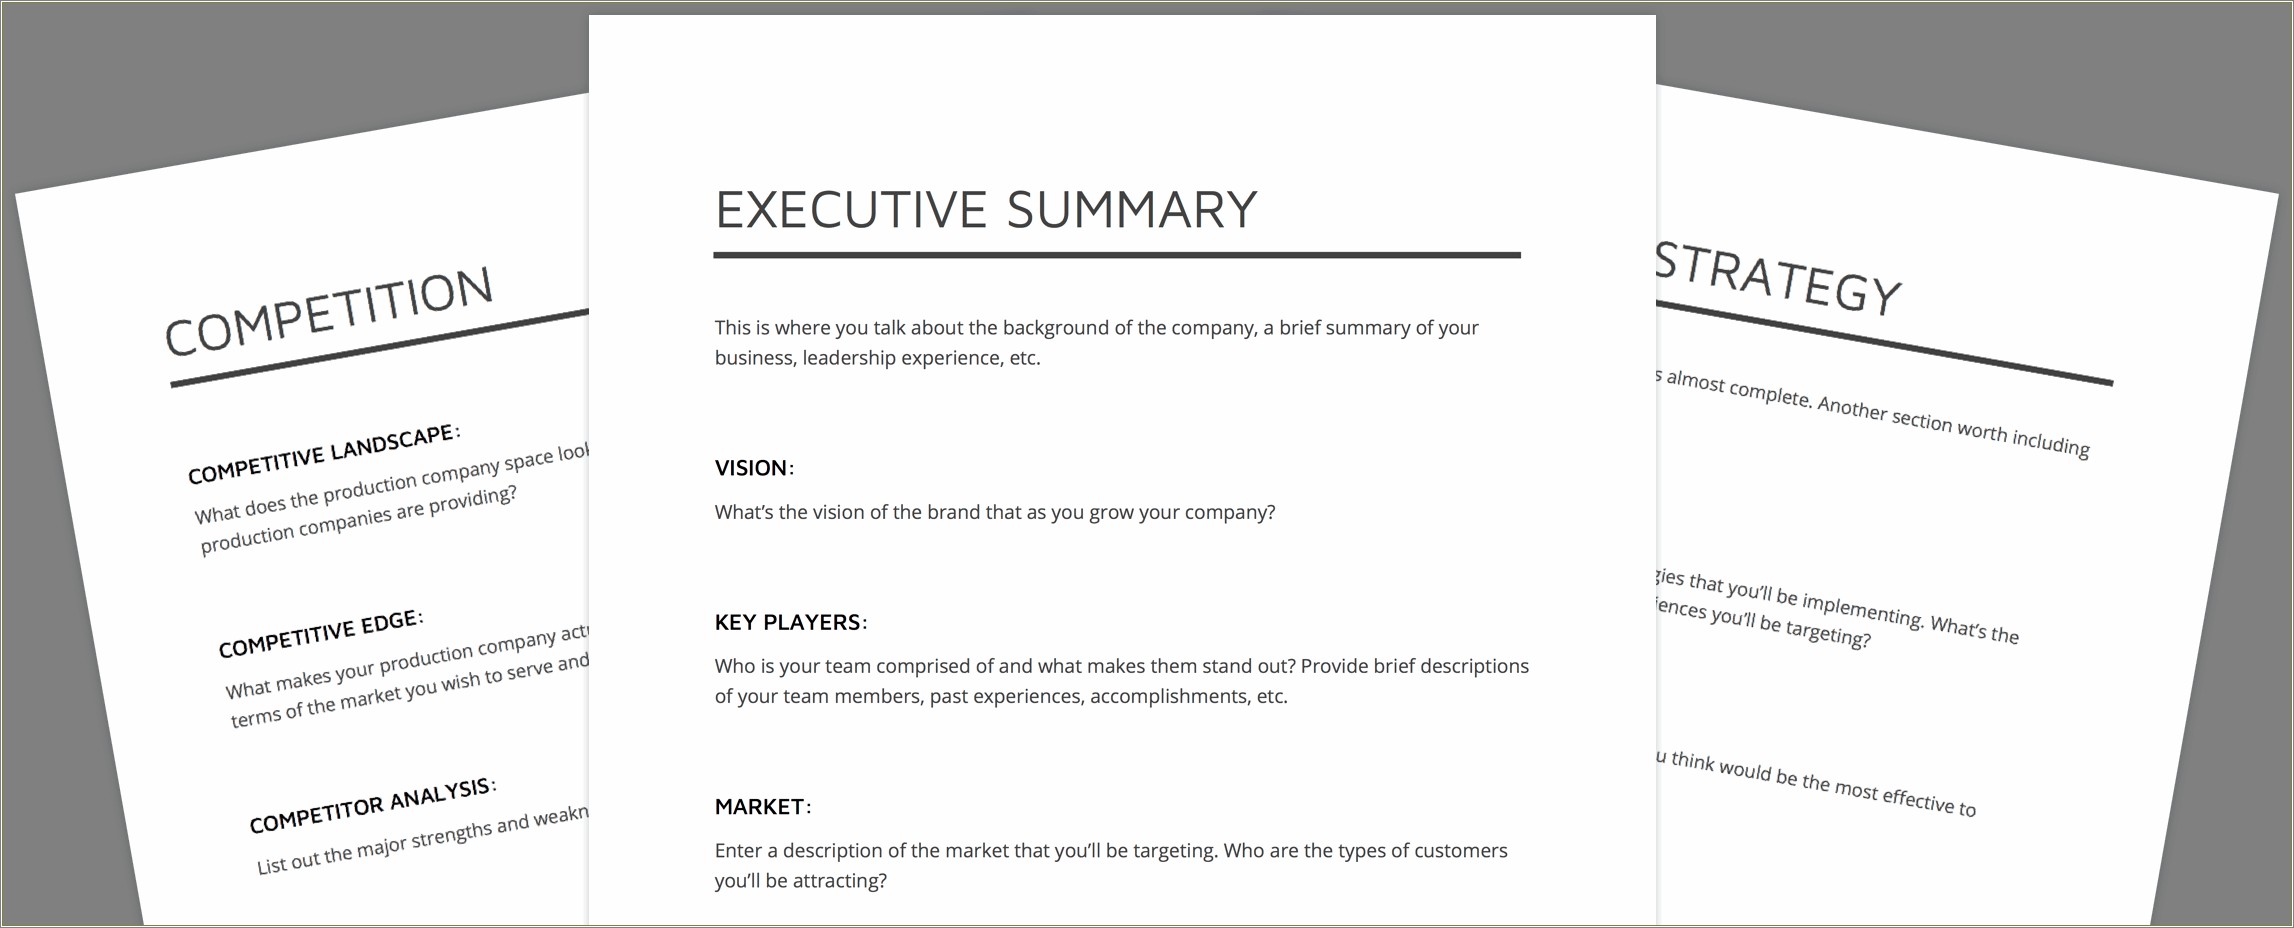 Free Sample Photography Business Plan Template Pdf